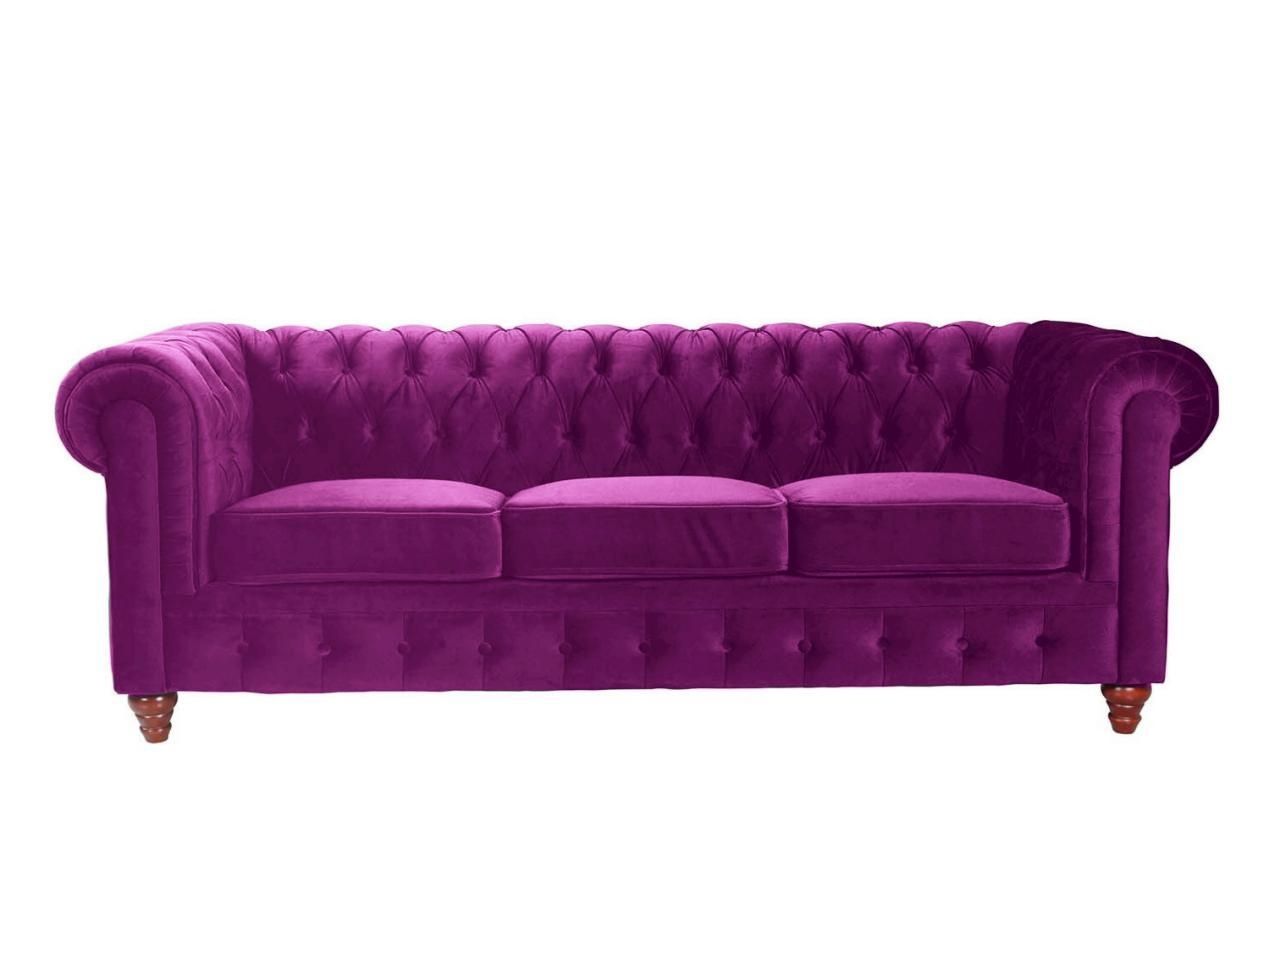 11 Of The Best Velvet Sofas To Decorate With | Hgtv's Decorating Intended For Sofa Trend (View 12 of 20)